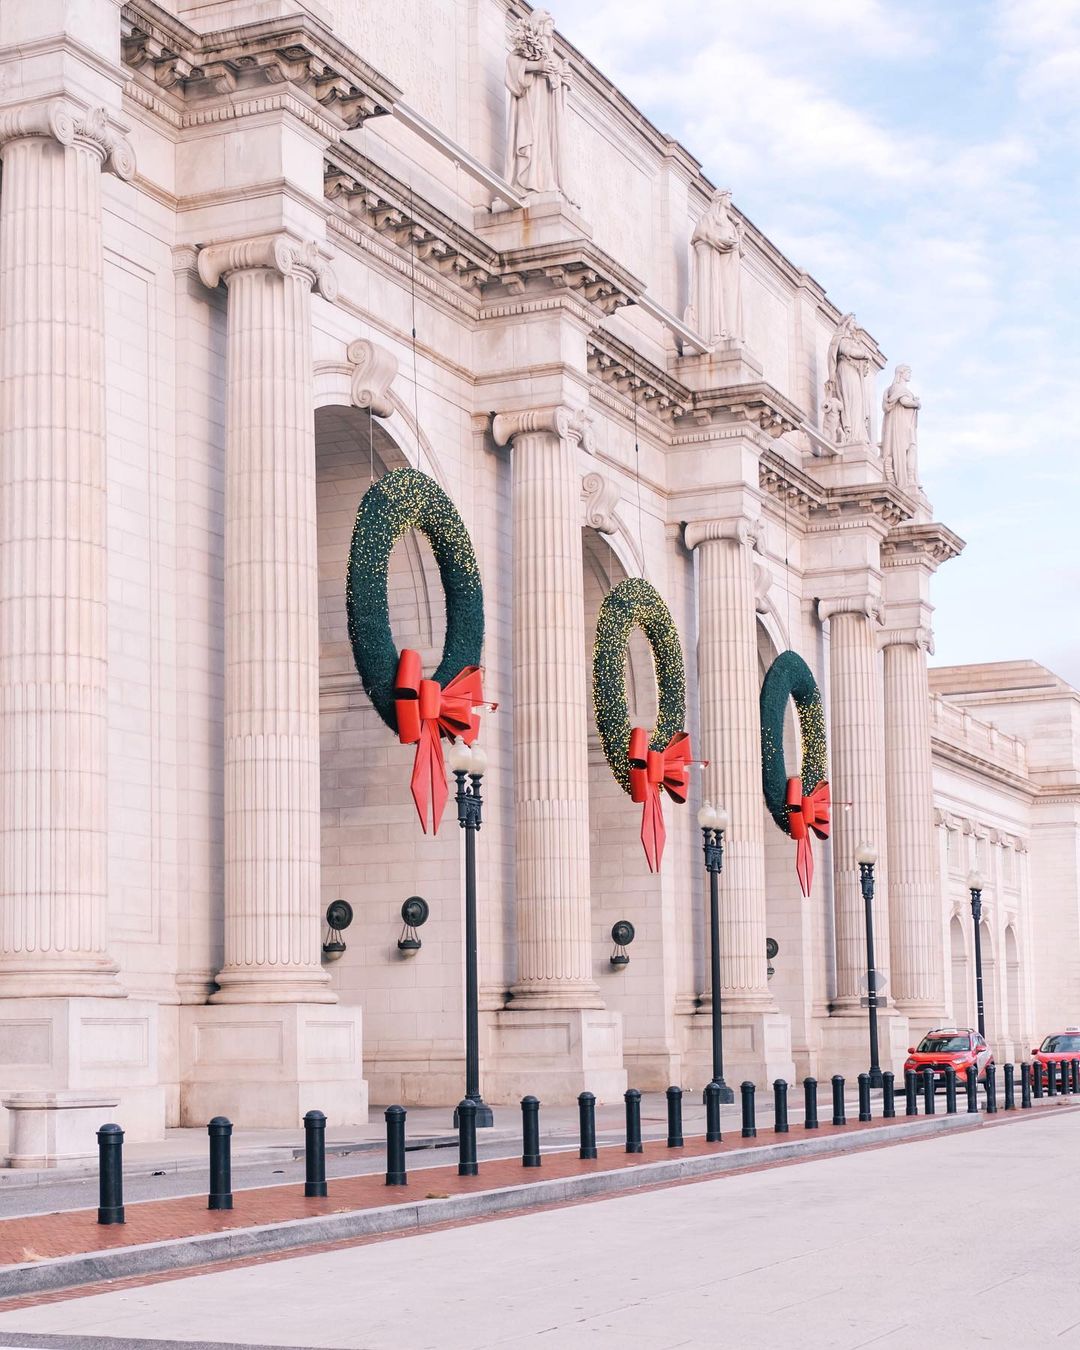 Festive image of union station in Washington, DC with decorative wreaths and large red bows. Photo by instagram user @laurajhaines